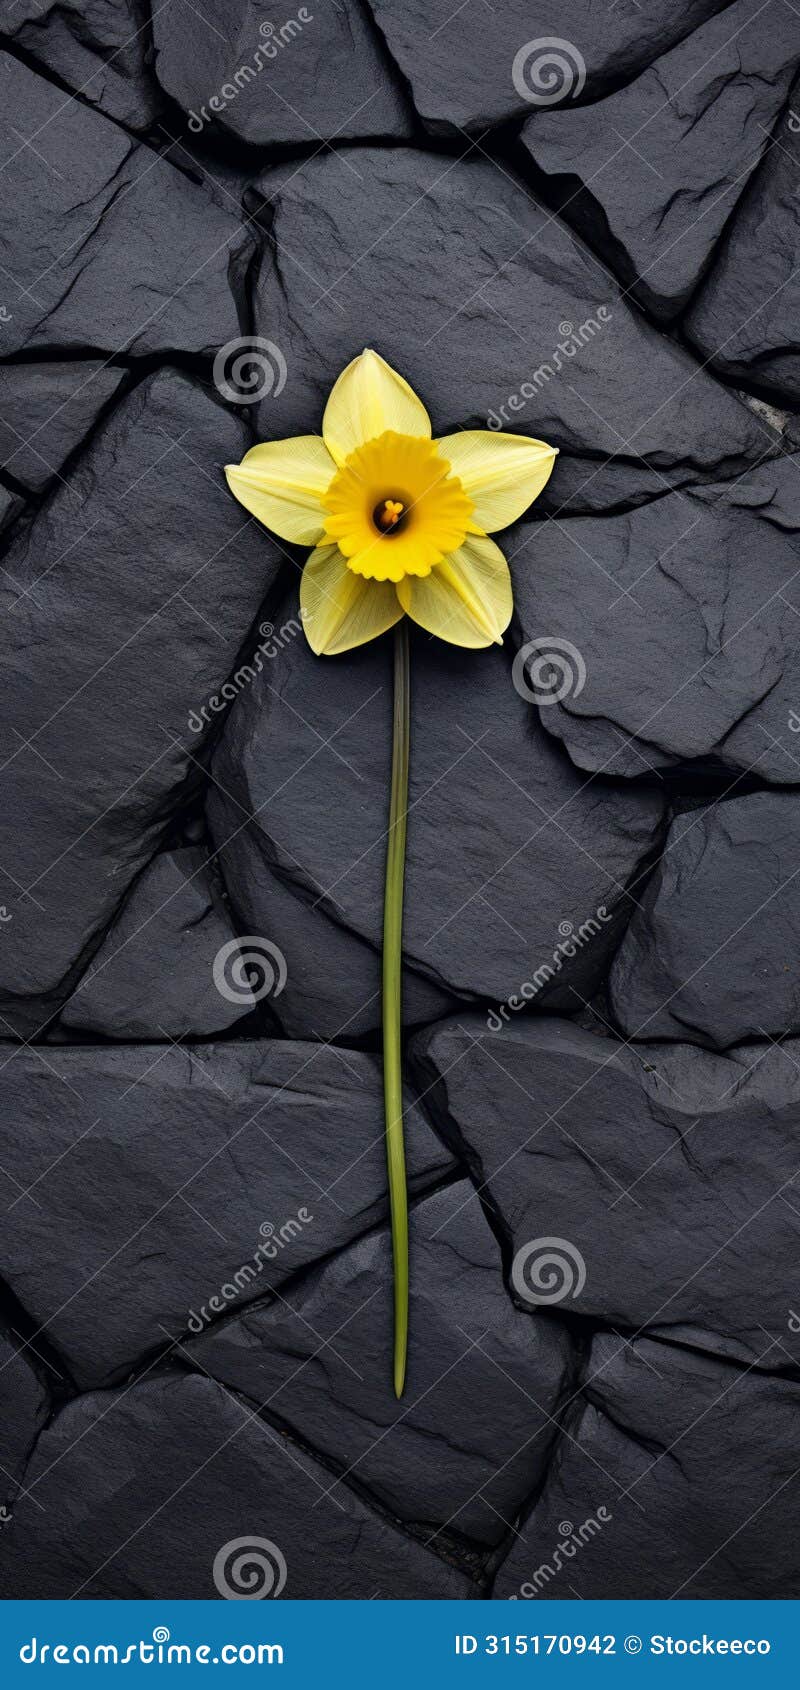 dark surrealism yellow daffodil on stone wall - stereotype photography